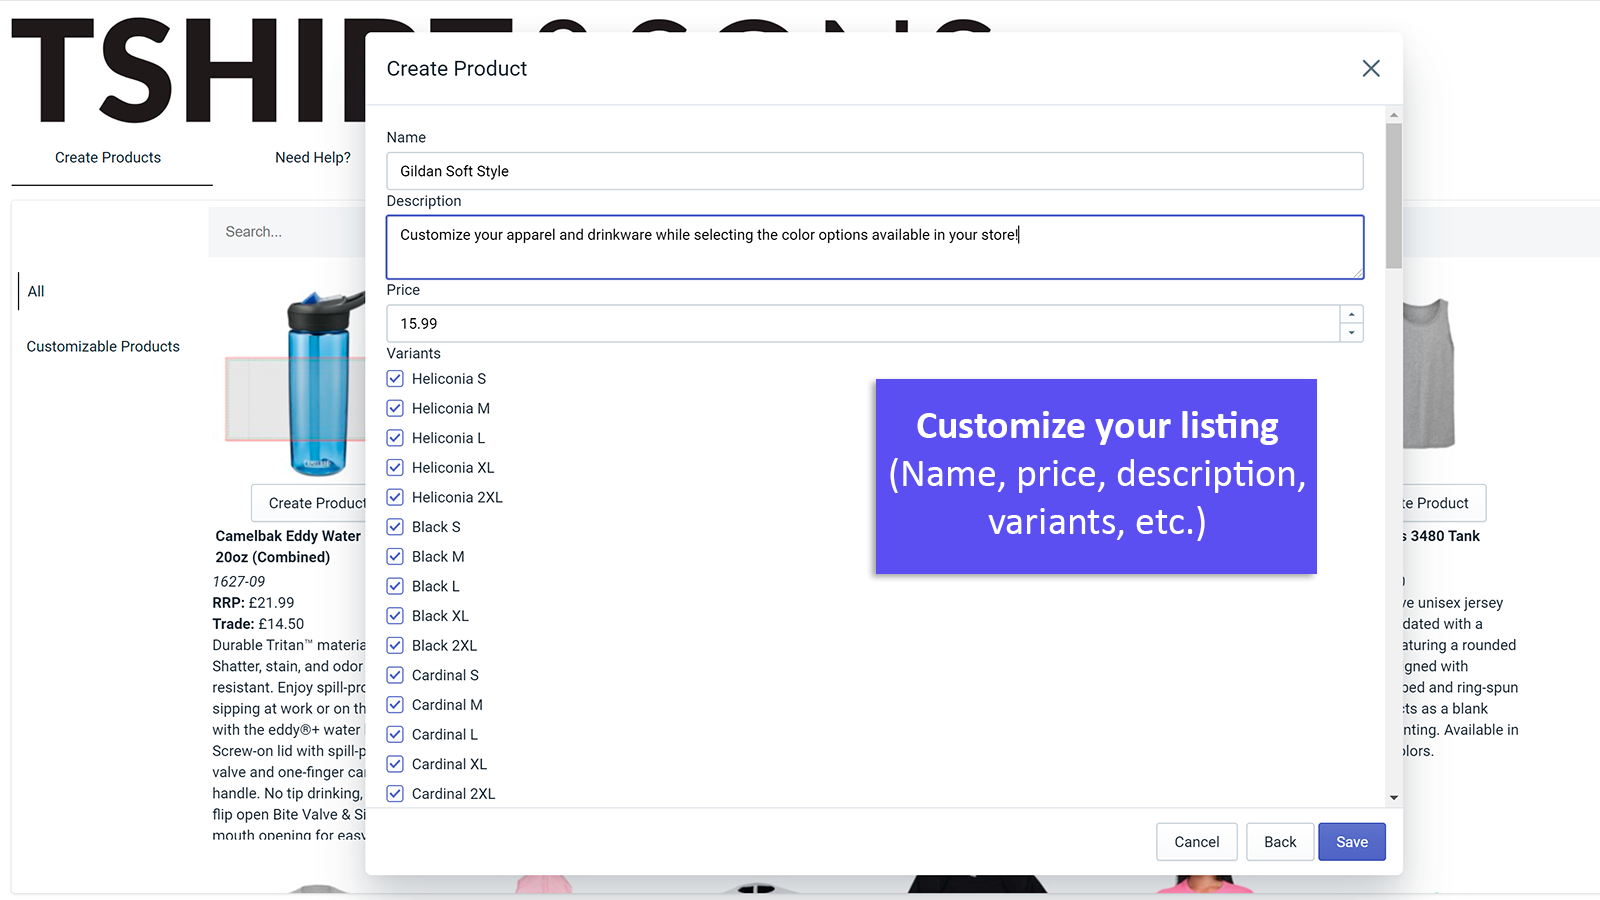 Customise your listing (name, price, description, variants)